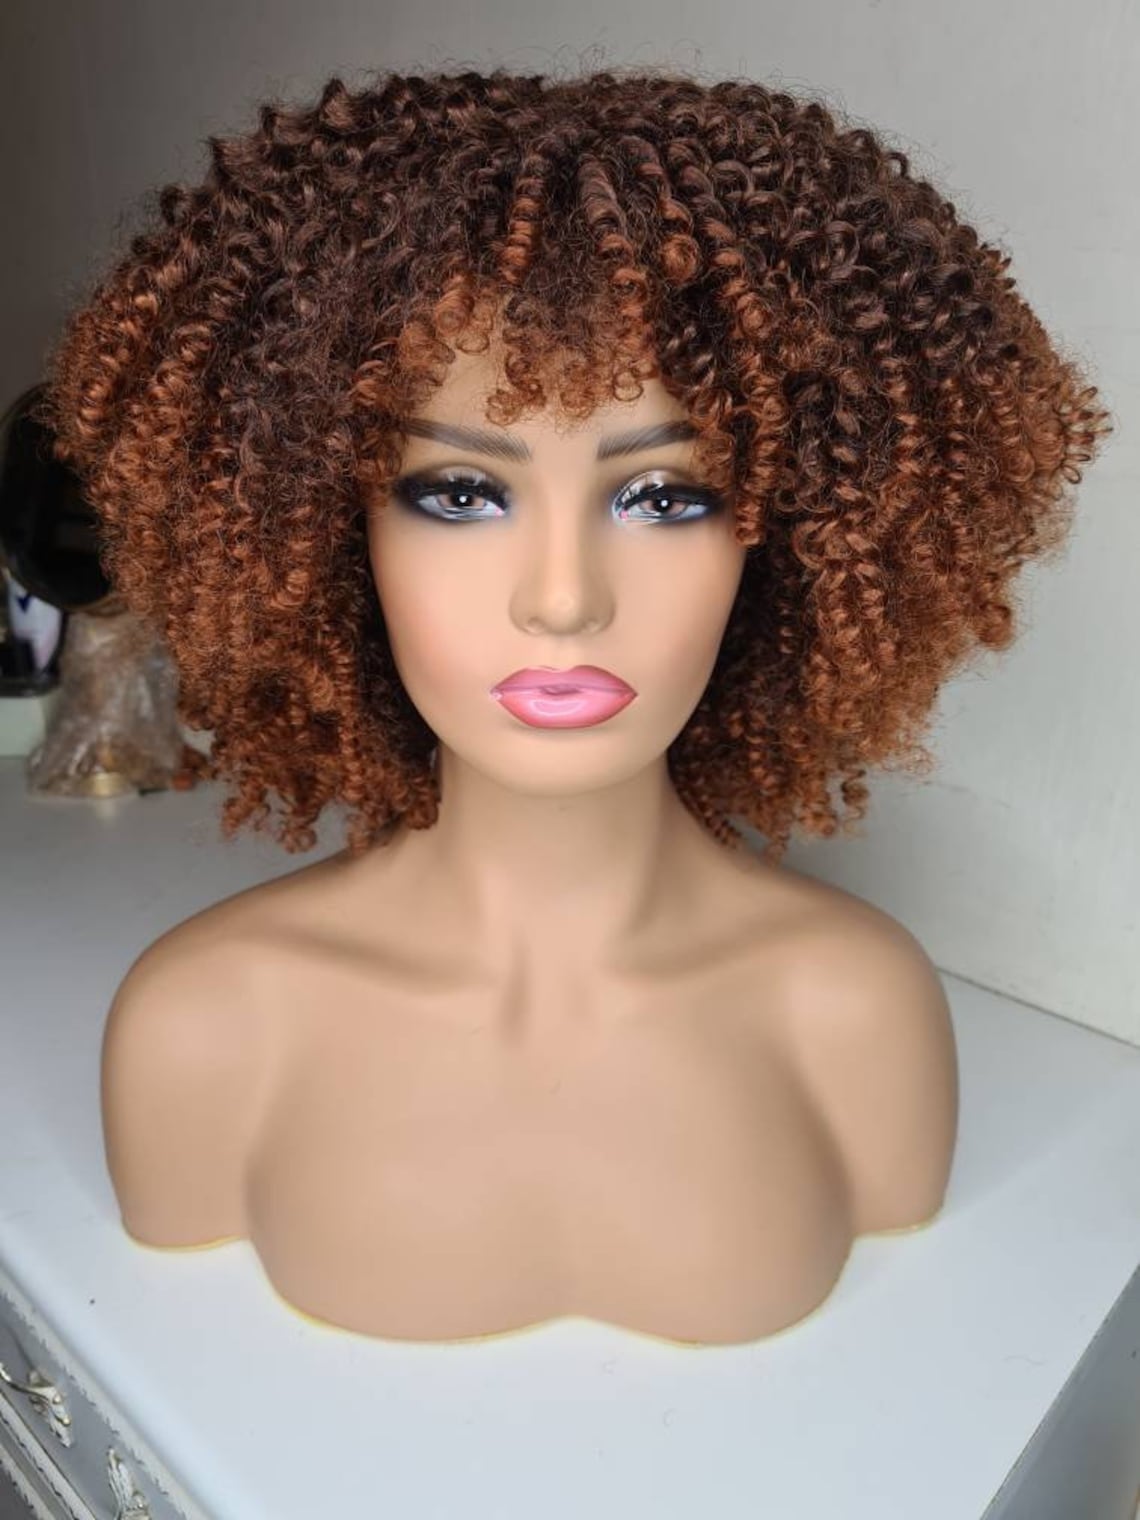 Synthetic Afro Kinky Curly Wig With Bang Fringe In Brown Made Of High Temperature Fibres Etsy